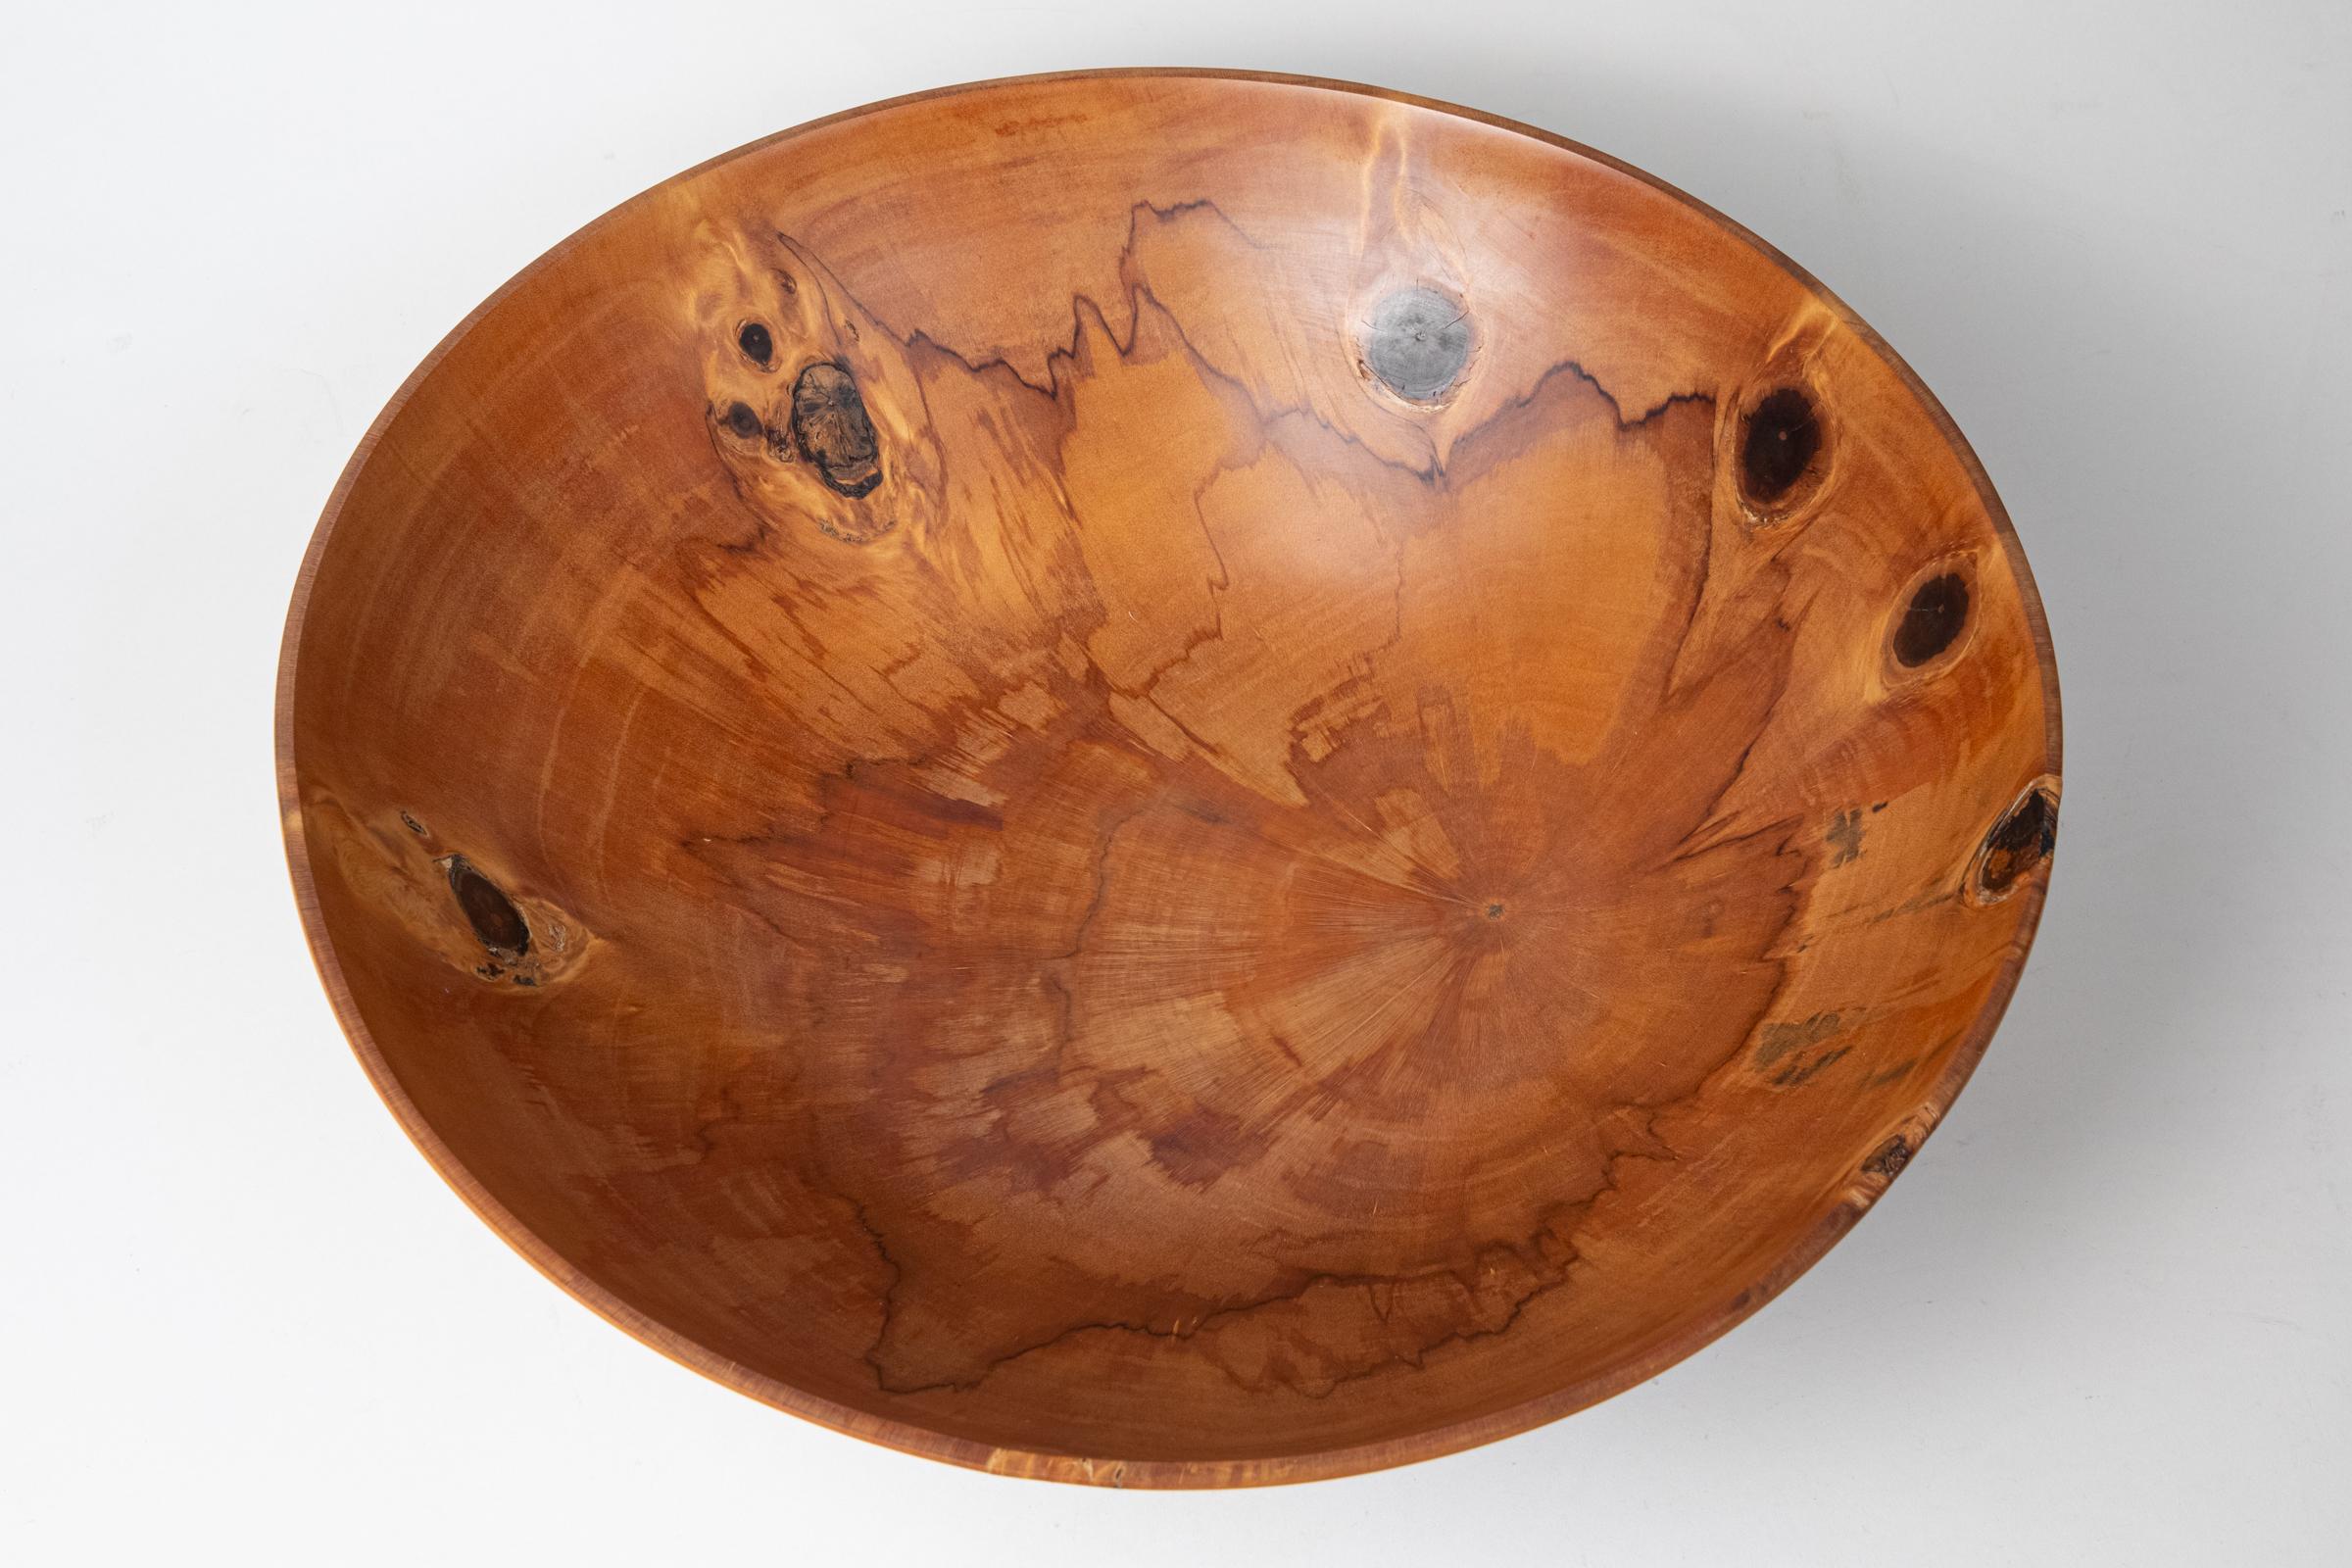 Large Hawaiian Turned Wood Art Bowl by Syd Vierra For Sale 4